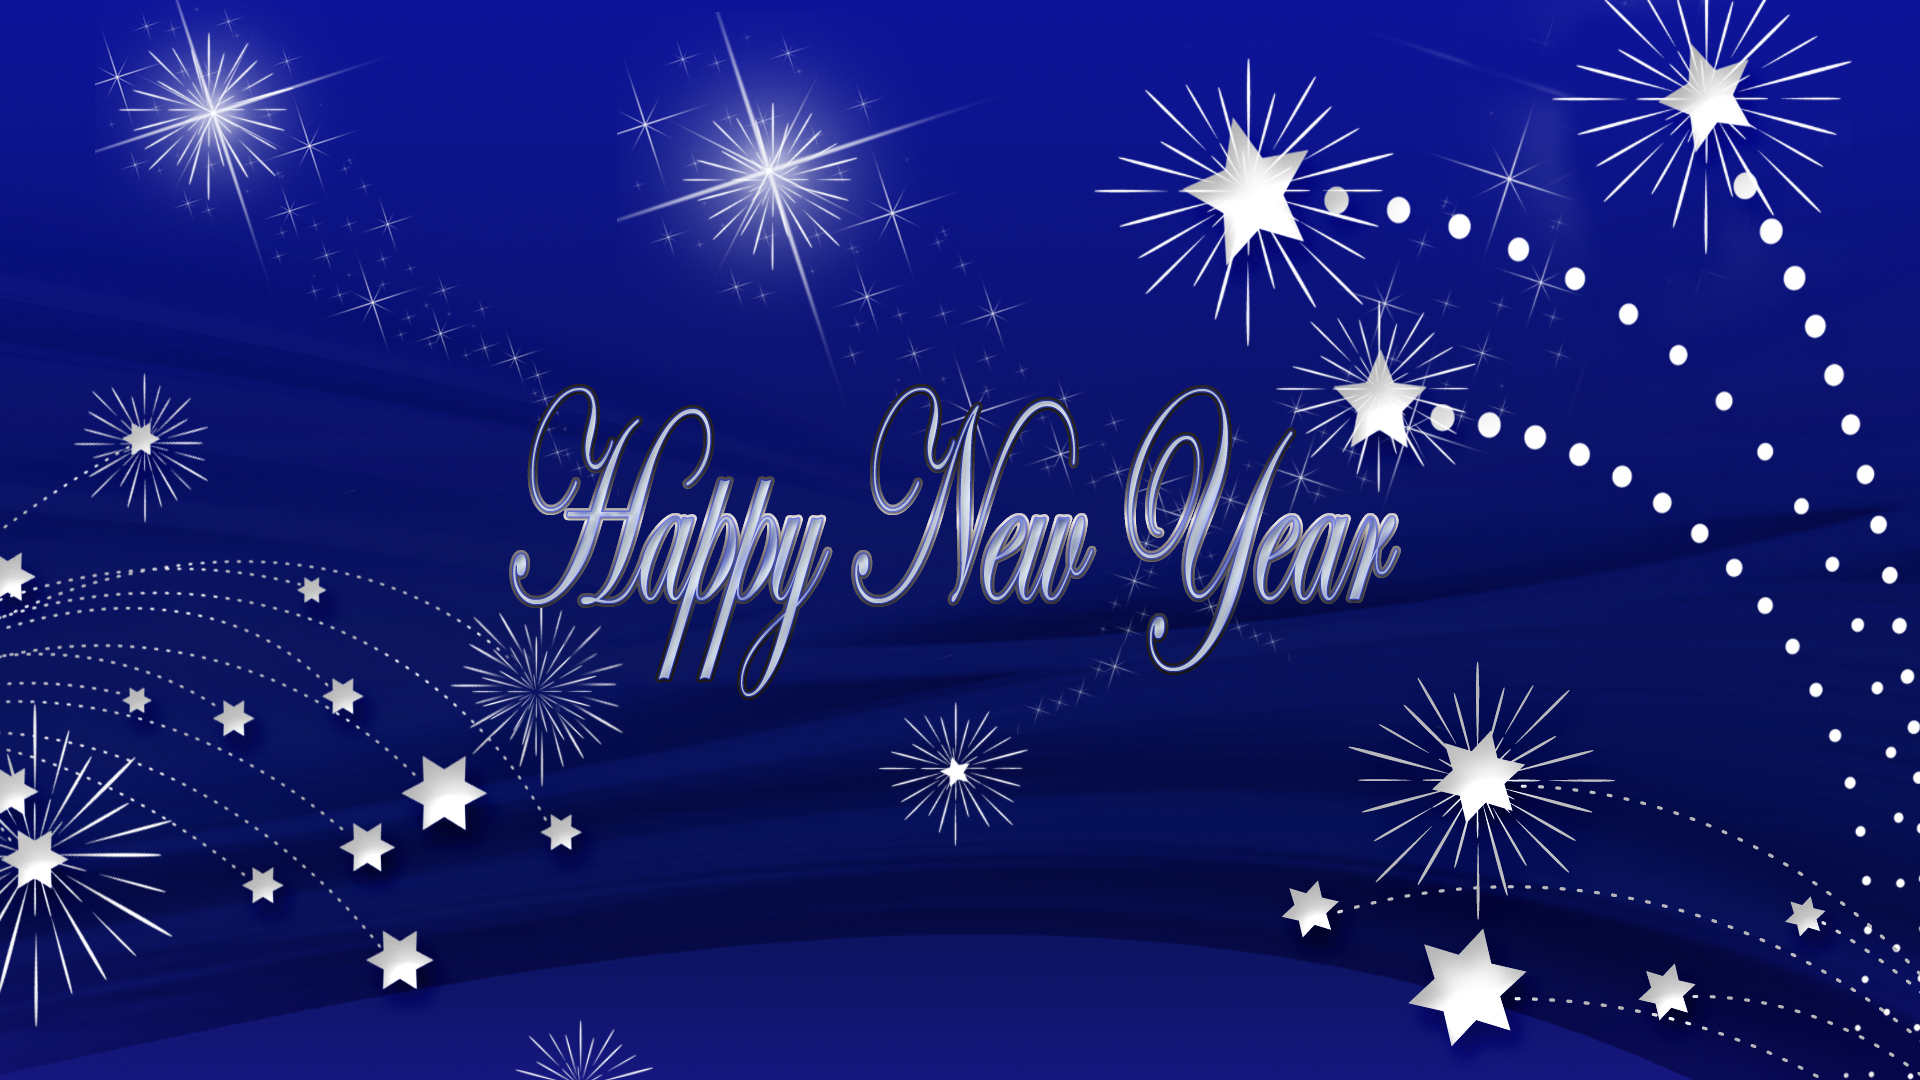 free high definition nice happy new year wallpaper download